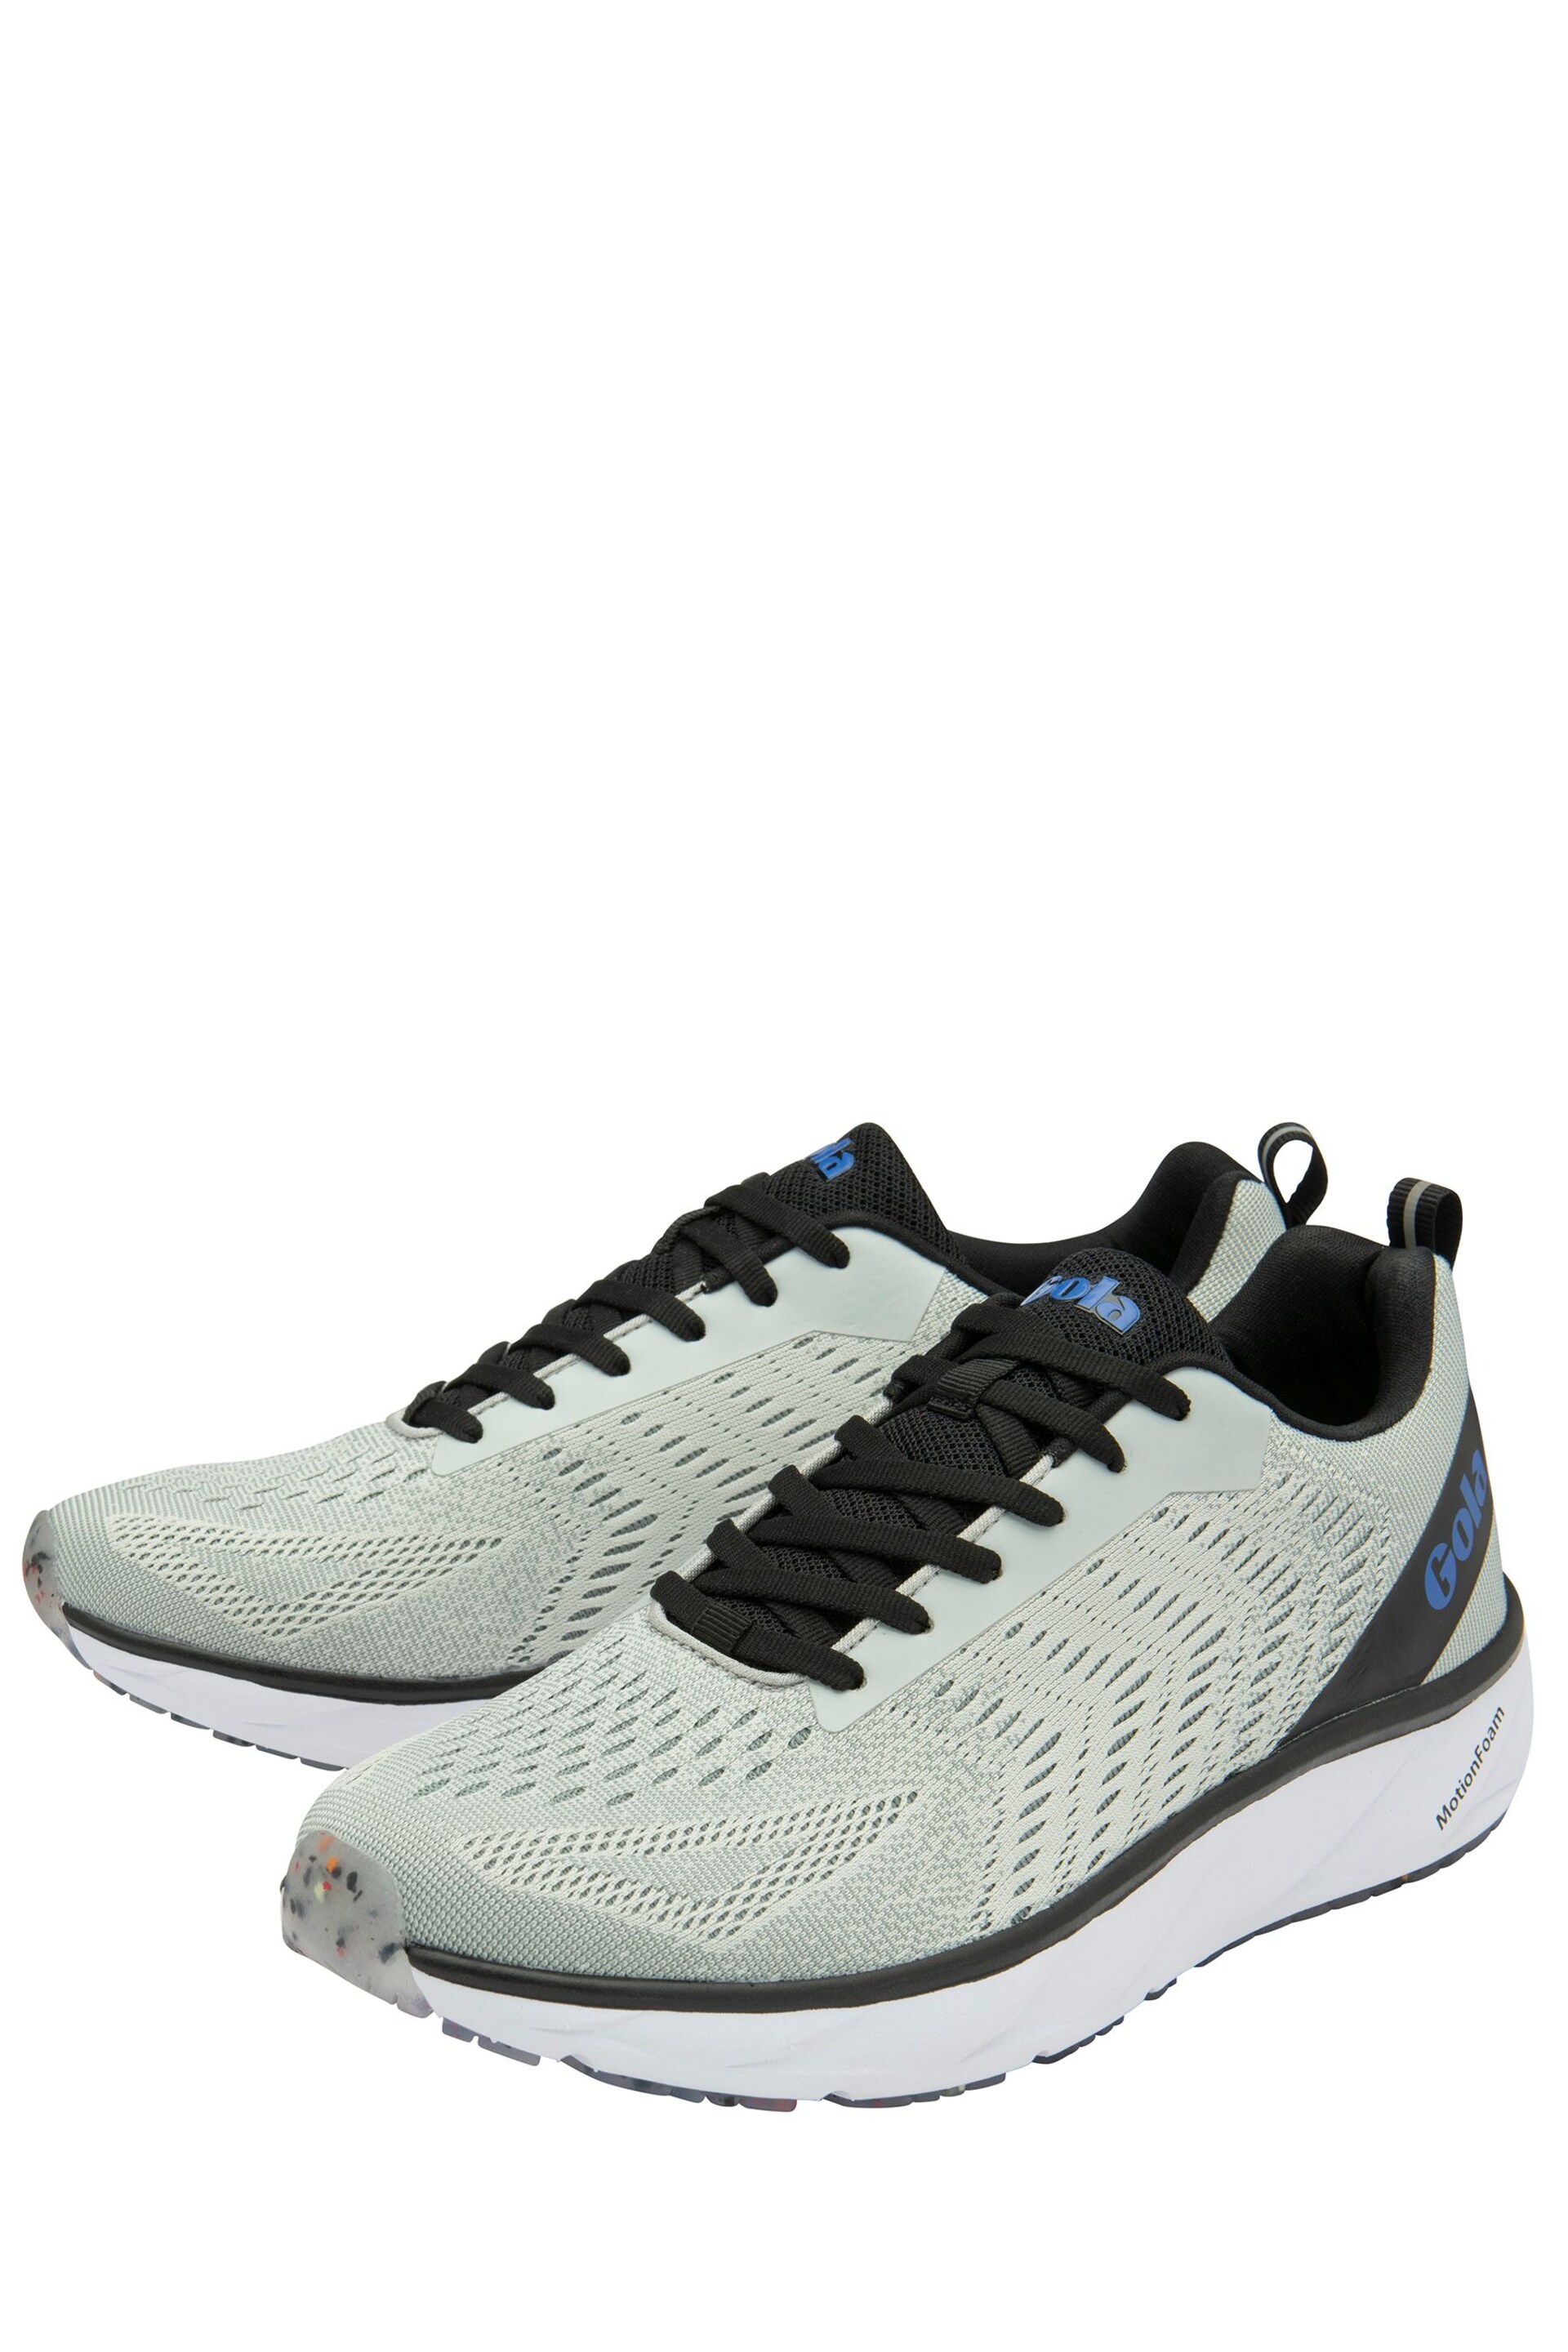 Gola Grey Gola Mens Grey Ultra Speed 2 Mesh Lace-Up Running Trainers - Image 2 of 4